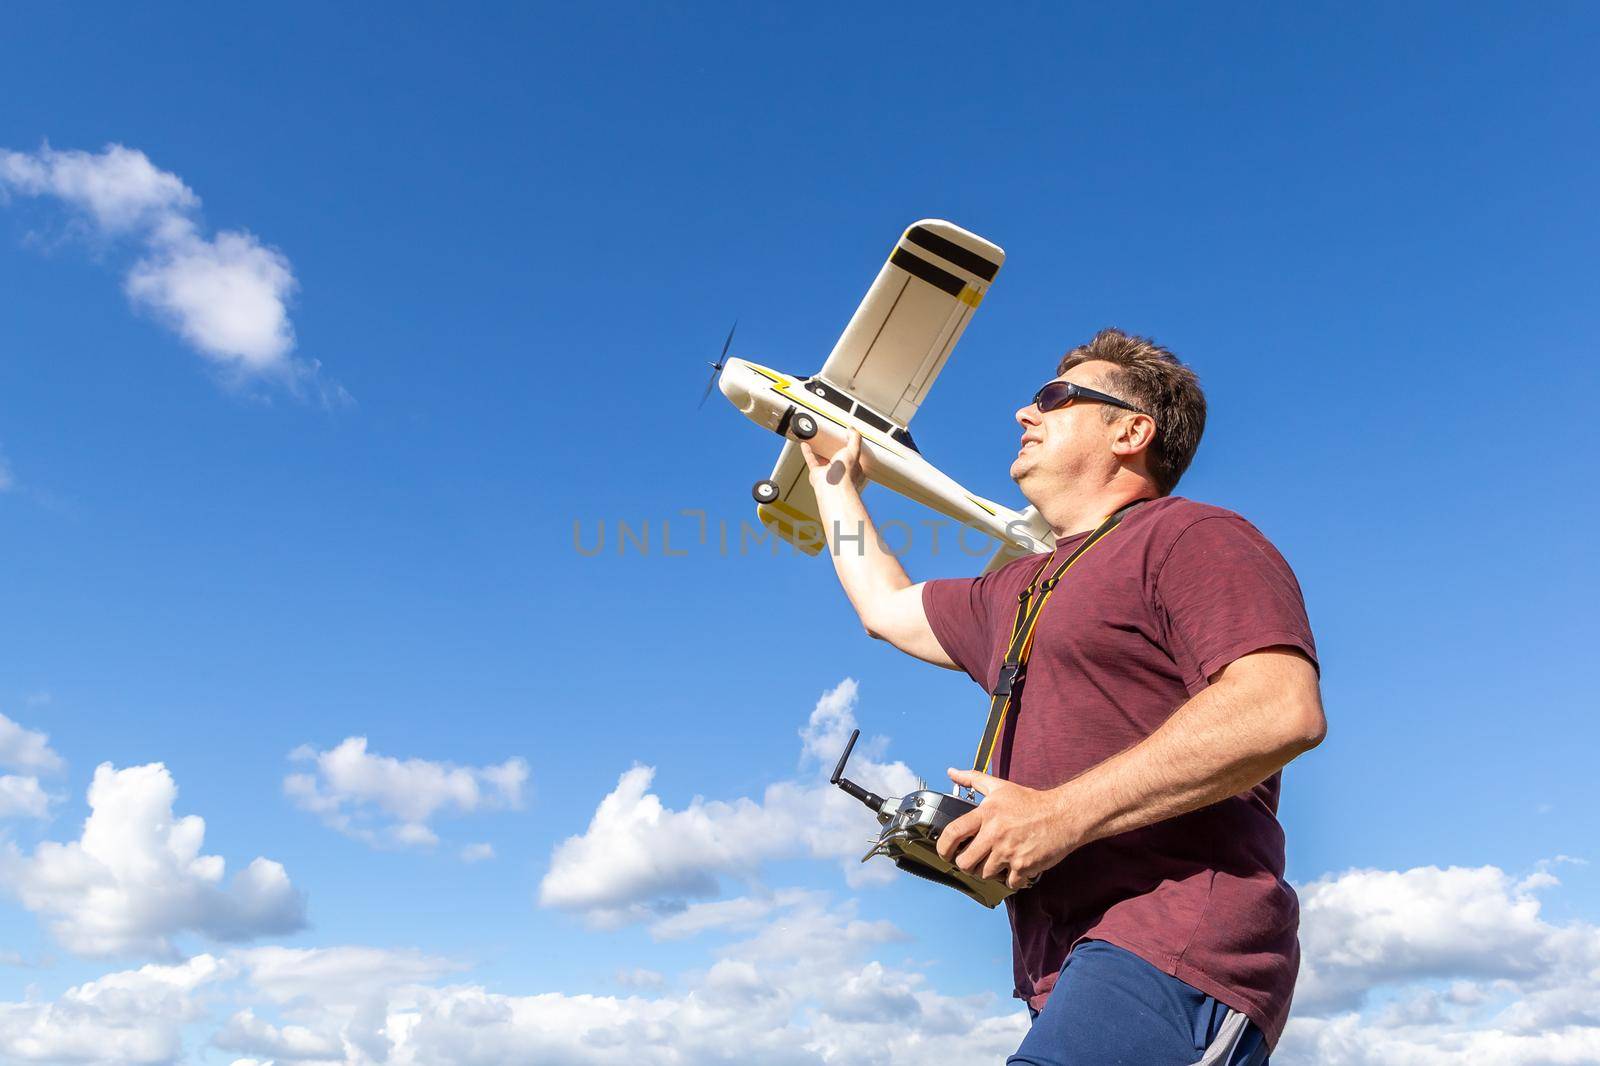 Middle-aged man launching a model of the radio remote controlled airplane outdoor on a background of the sky